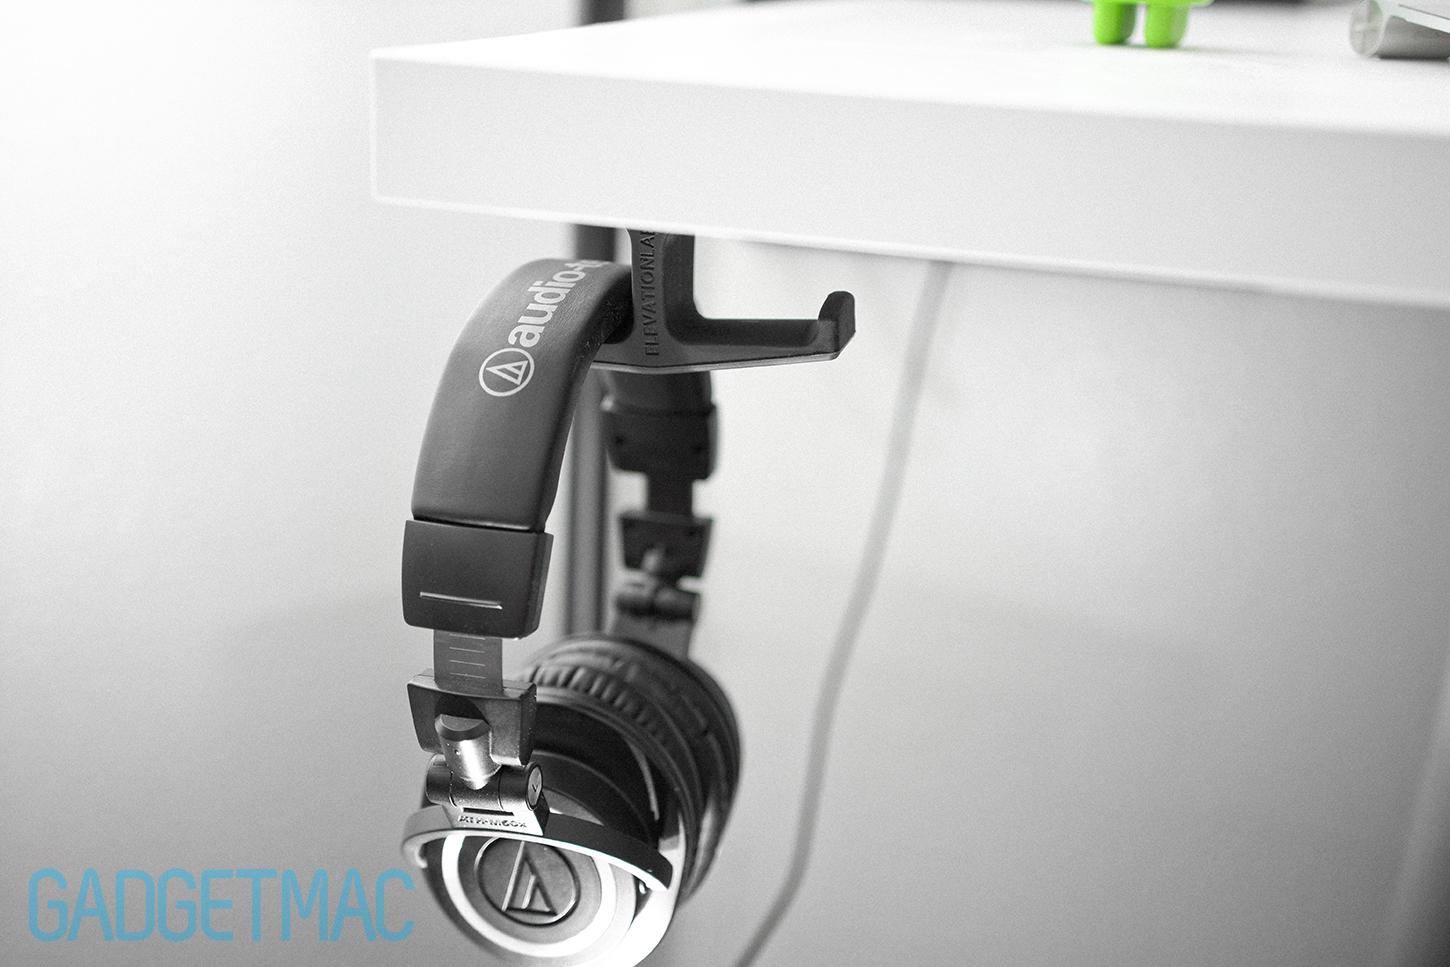 The Anchor - The Original Under-Desk Headphone Stand Mount